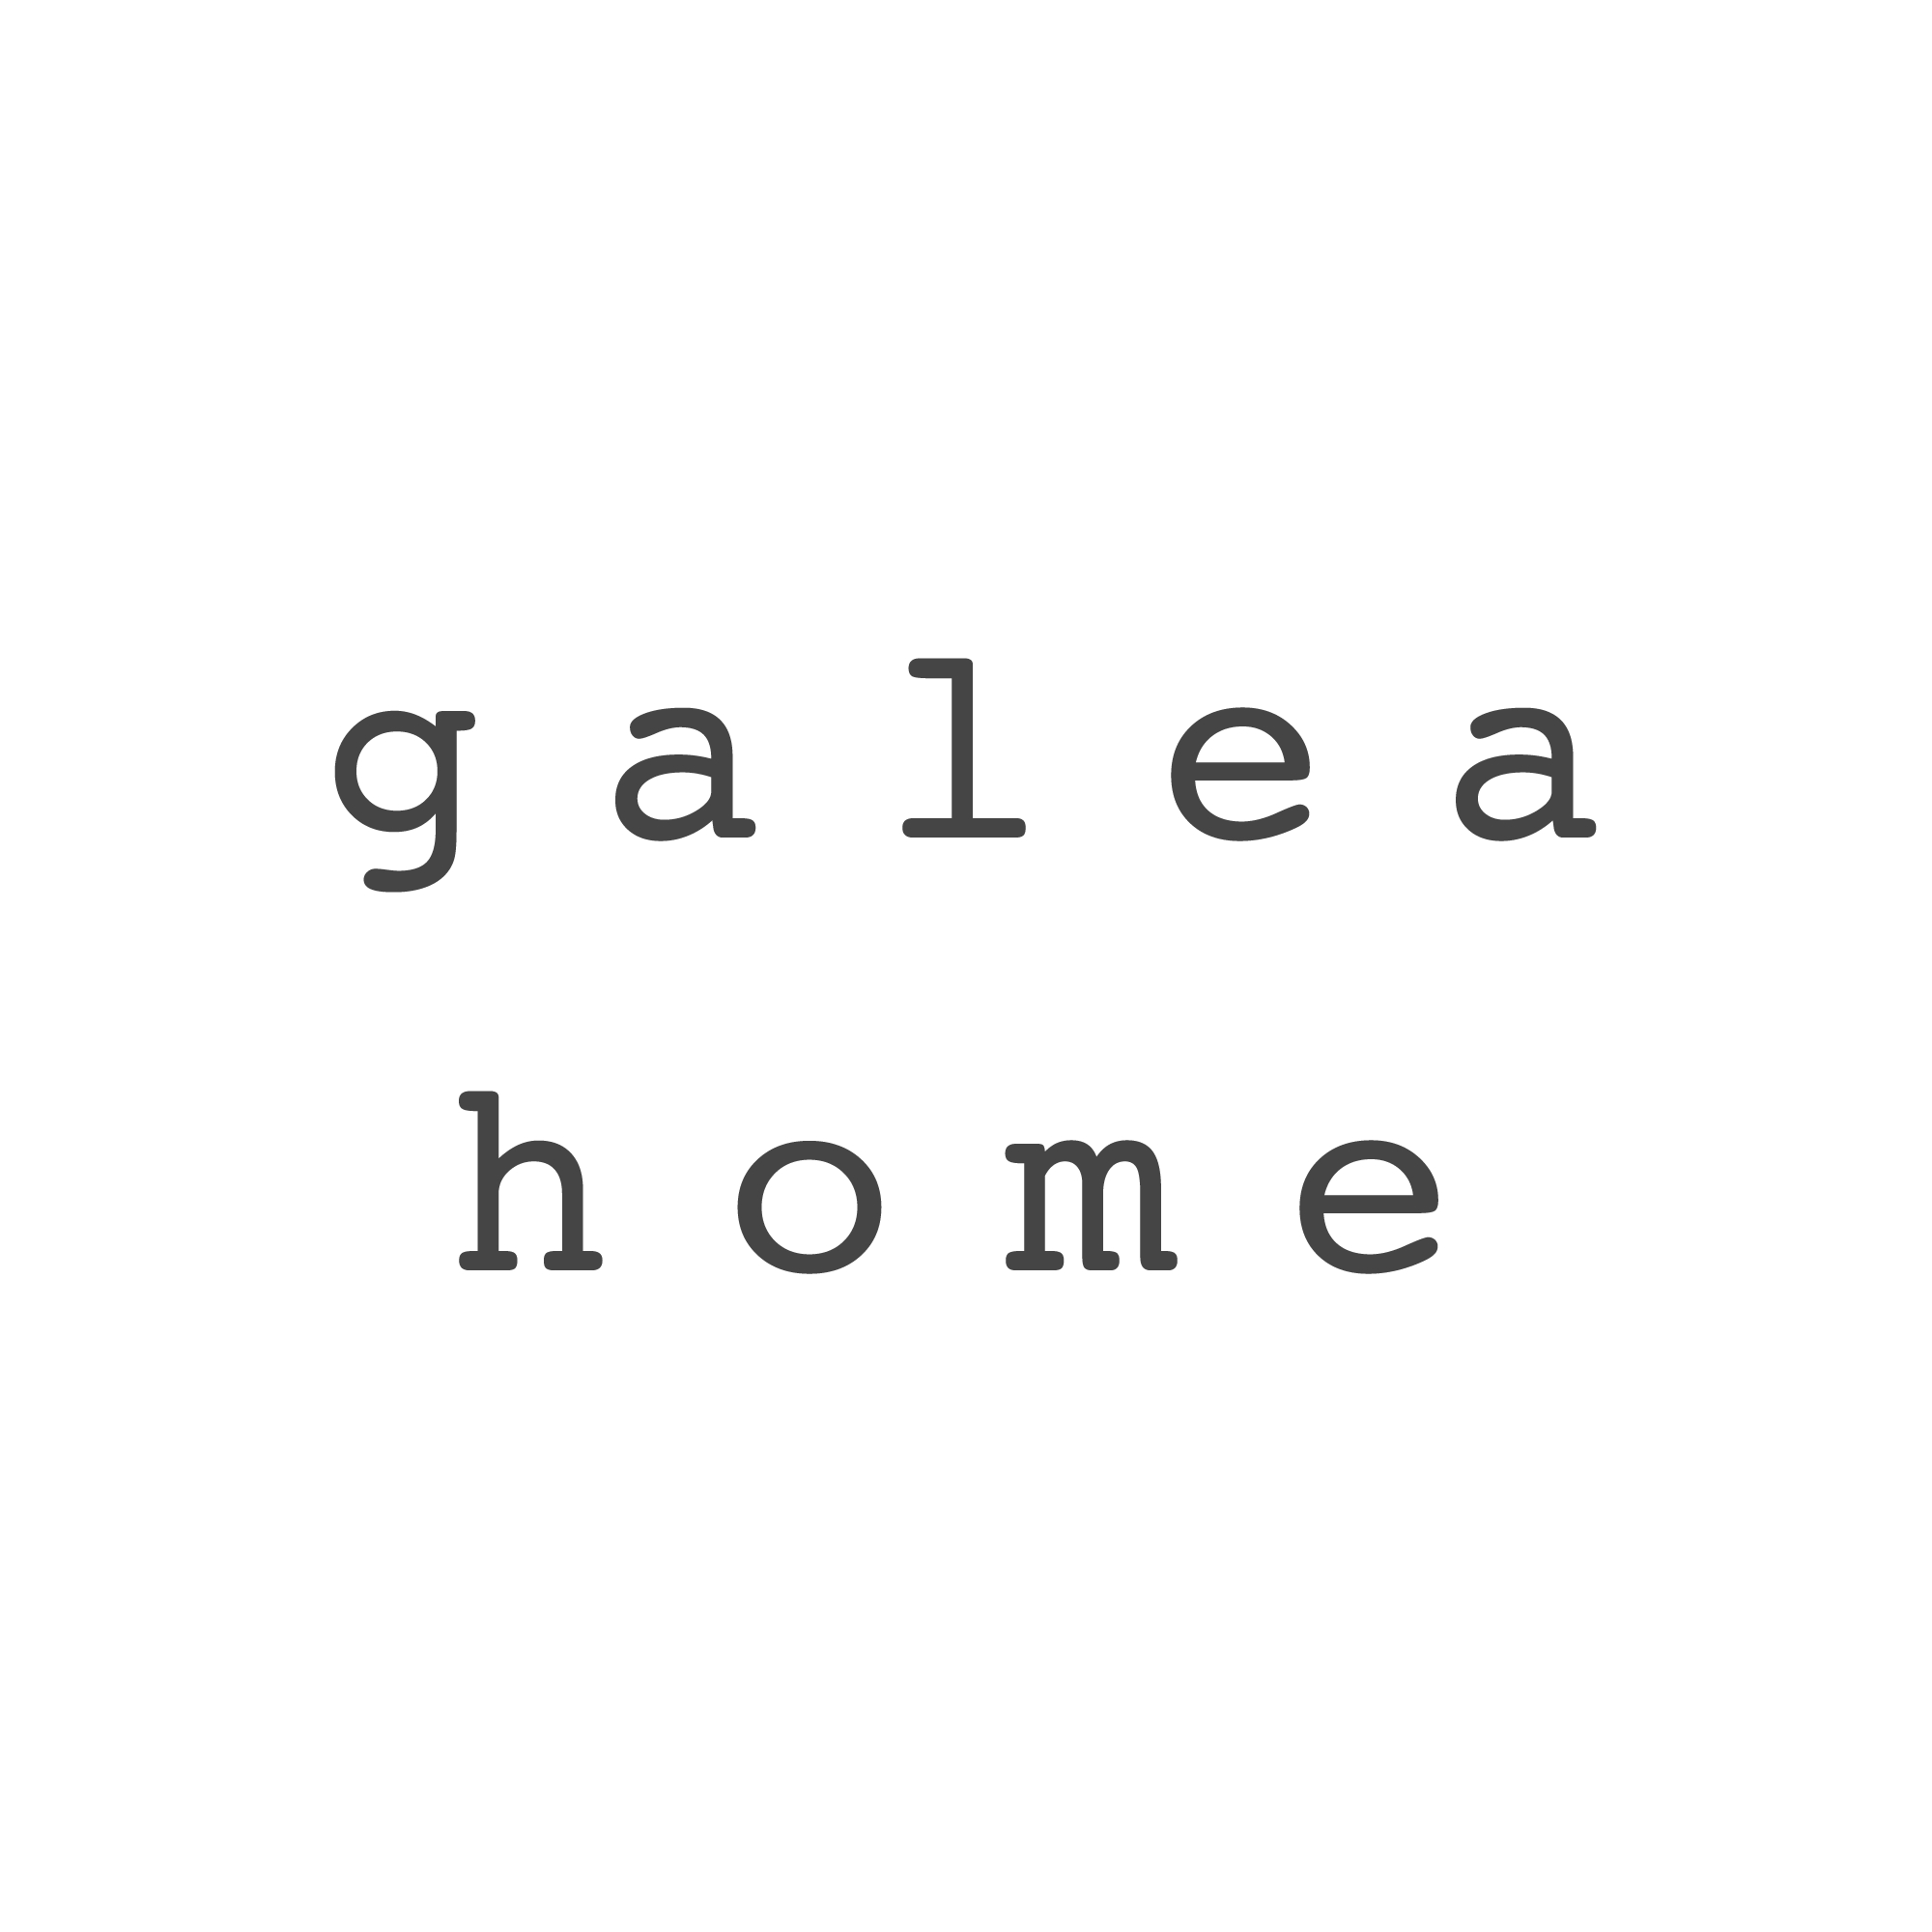 Galea Home Coupons & Promo Codes